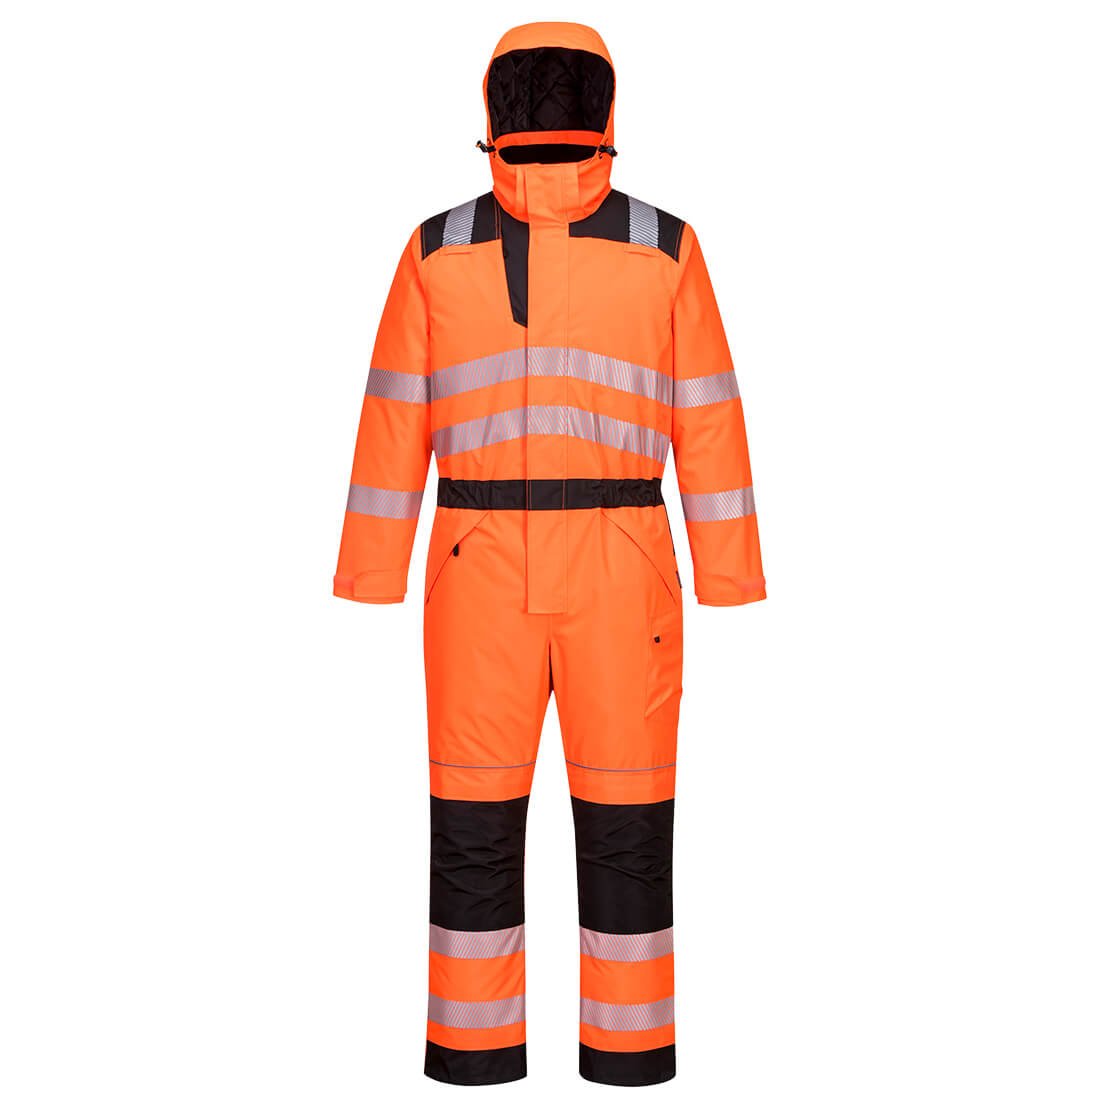 PW3 Hi-Vis Winter Coverall - arbeitskleidung-gmbh